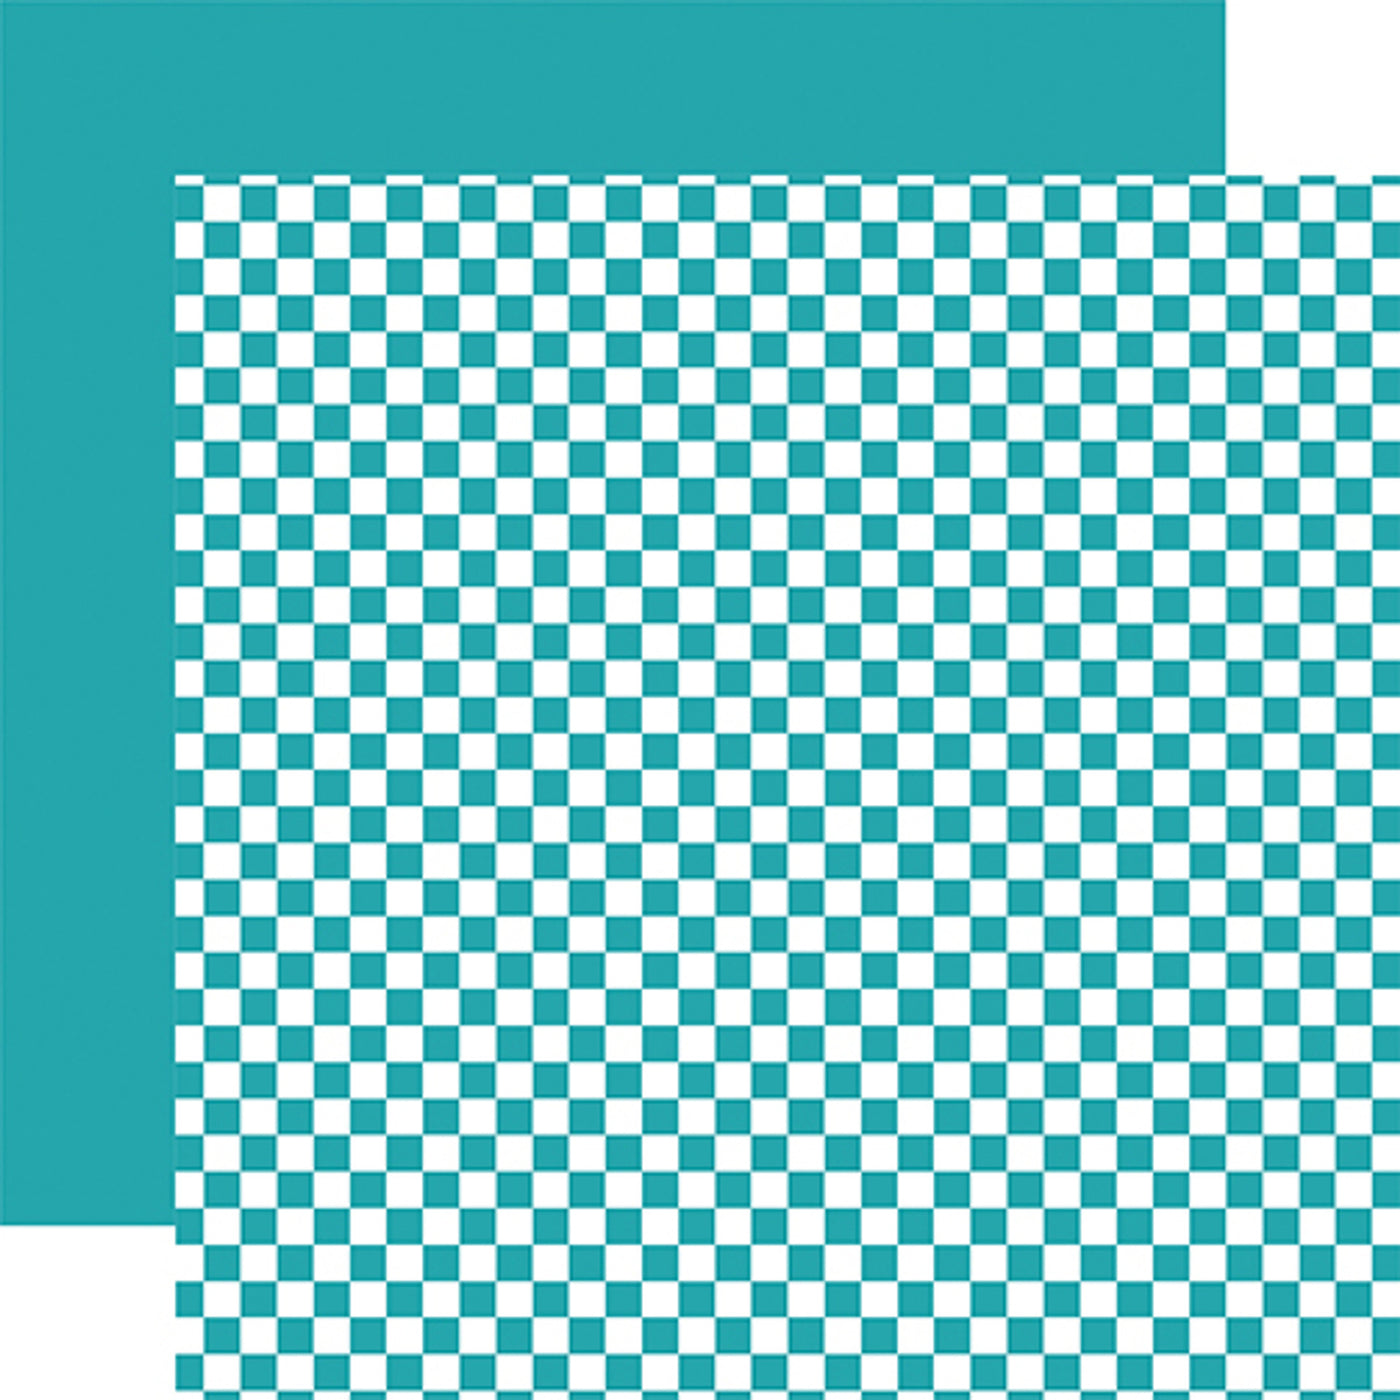 Double-sided 12x12 cardstock sheets - teal checkered, teal solid reverse. 65 lb. smooth cardstock. -Echo Park